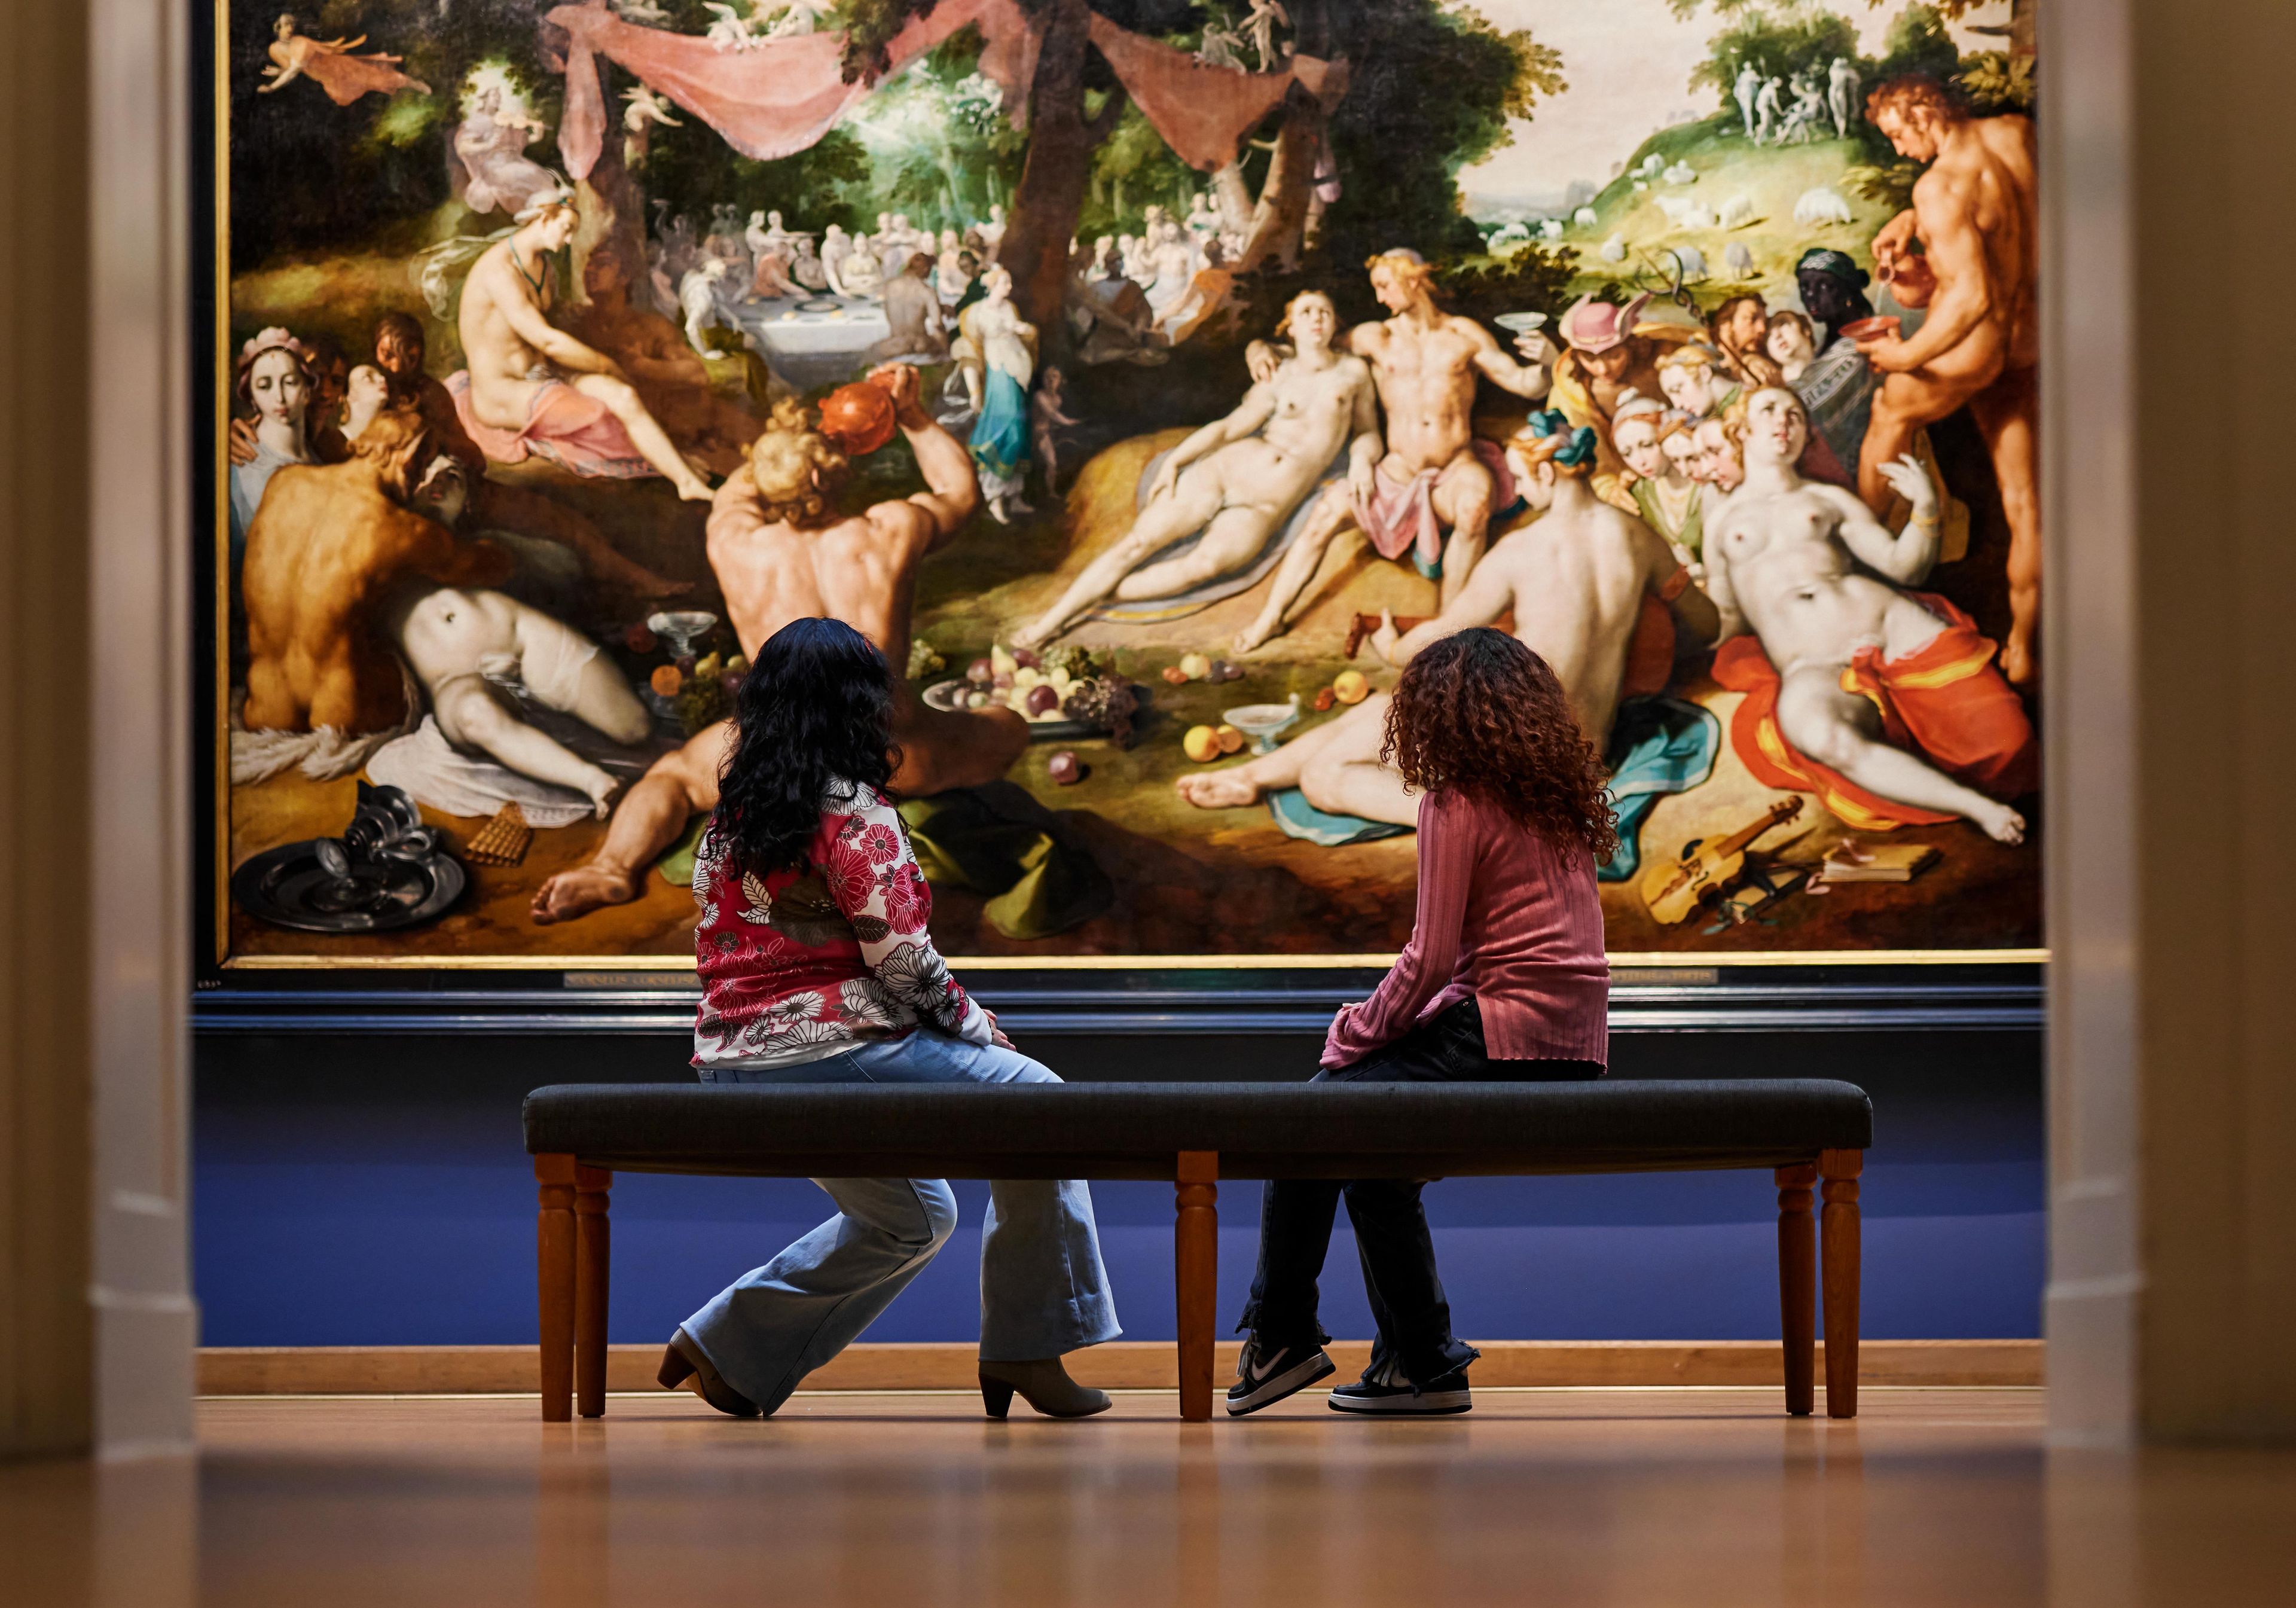 Two visitors on a bench looking at a work of art by Cornelis van Haarlem.